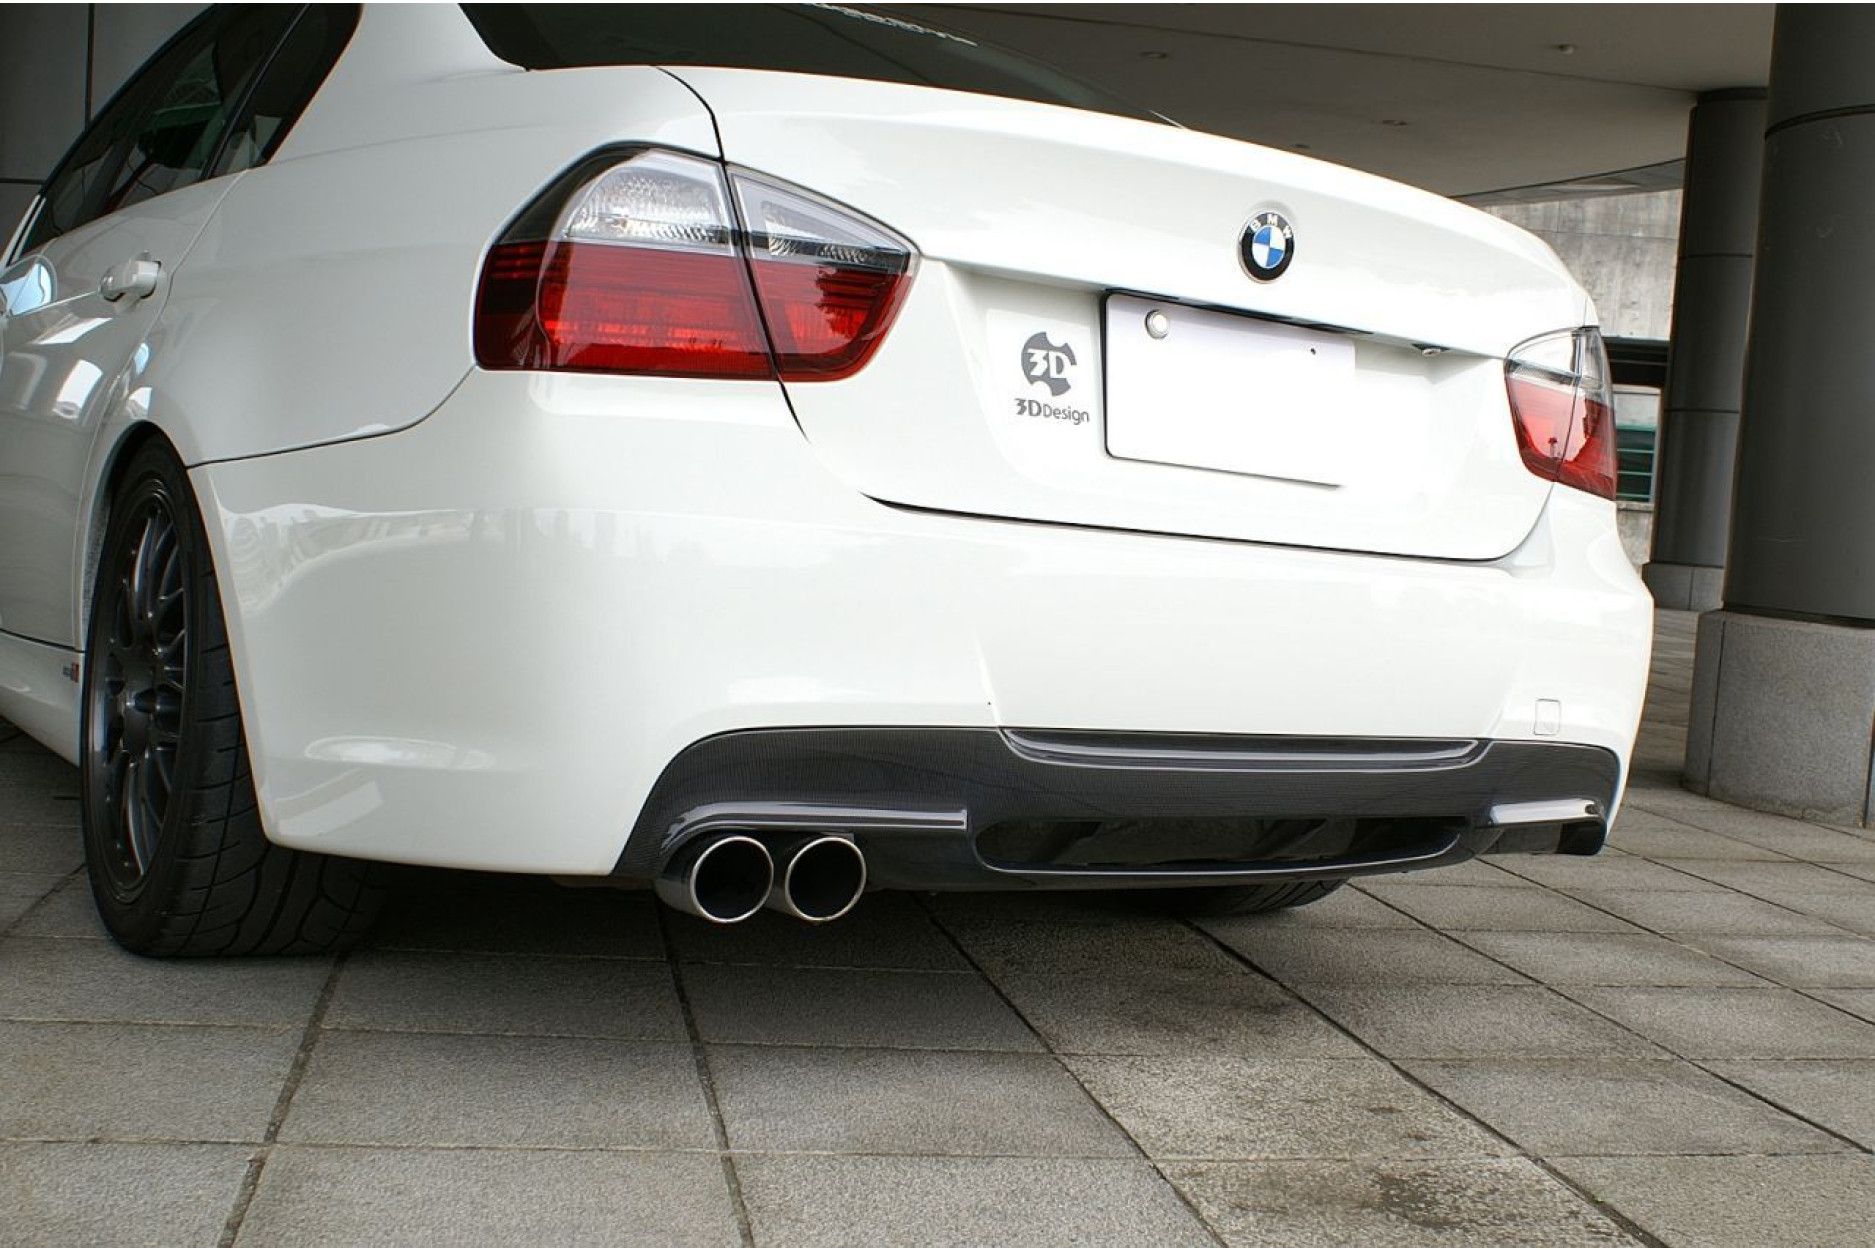 3Ddesign carbon diffuser fitting for BMW 3 Series E90 E91 with M-Tech